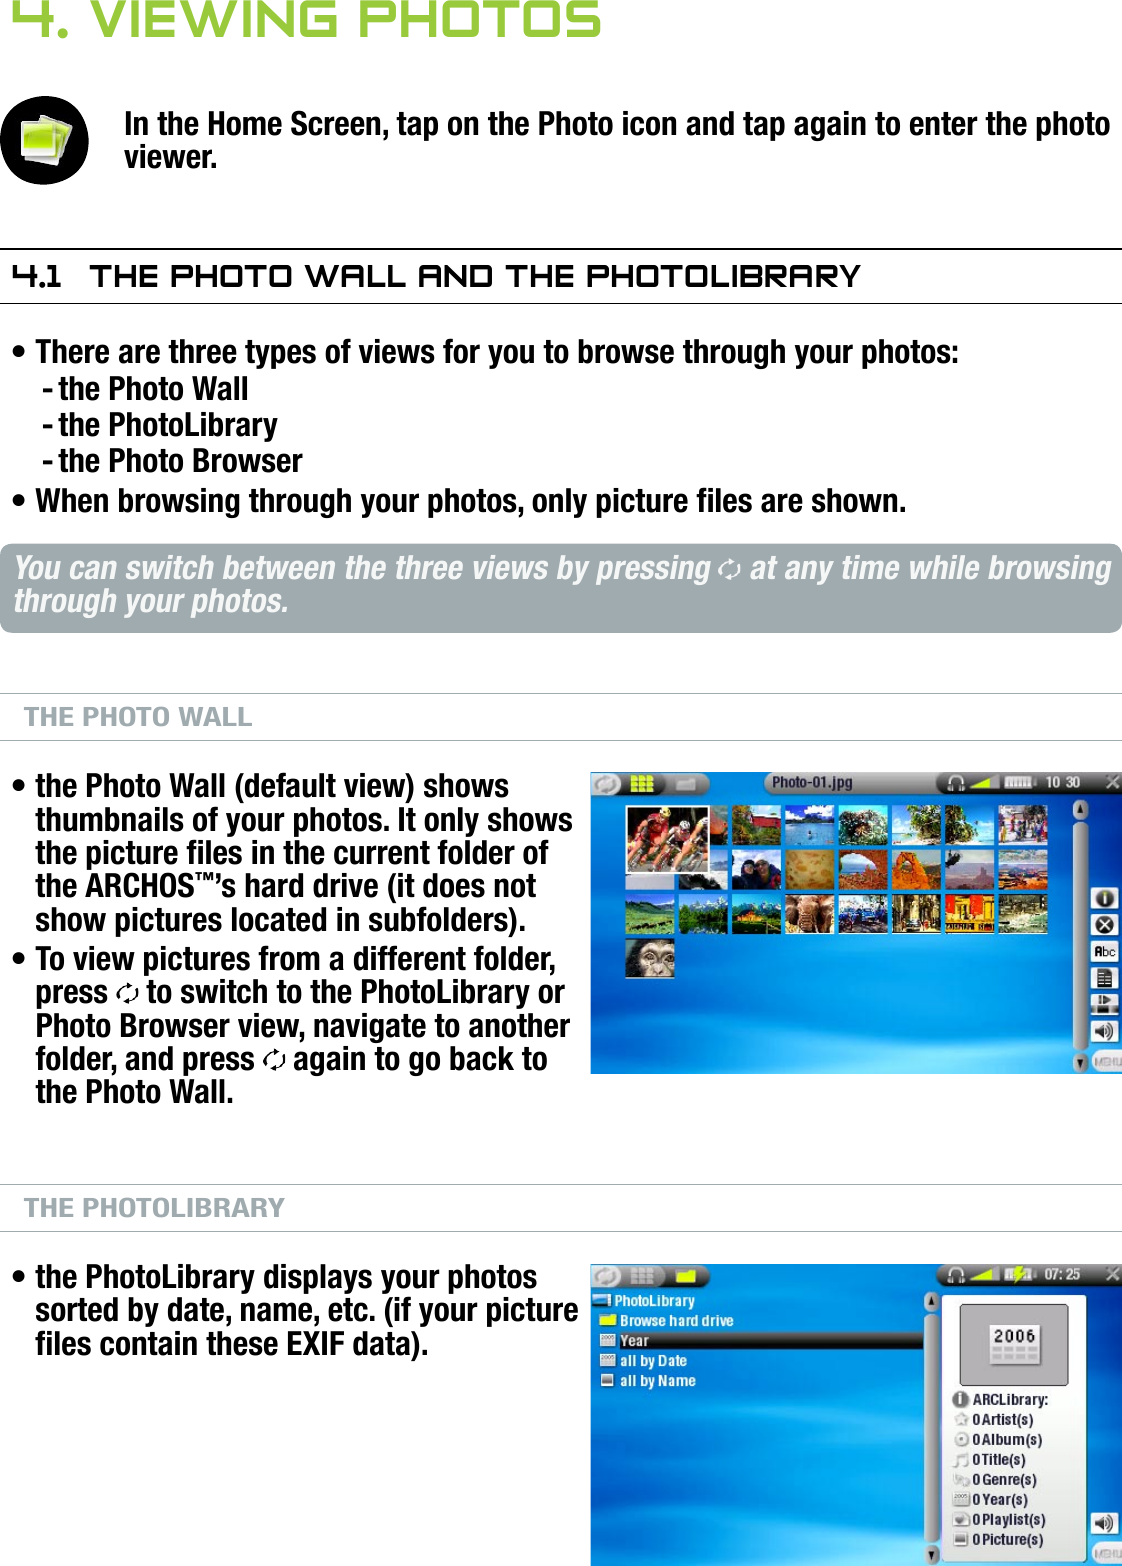 704MANUAL V0.0VIEWING PHOTOS   &gt;   p. 264. Viewing PhOTOsIn the Home Screen, tap on the Photo icon and tap again to enter the photo viewer.4.1  The PhOTO wall and The PhOTOlibraryThere are three types of views for you to browse through your photos:the Photo Wallthe PhotoLibrarythe Photo BrowserWhen browsing through your photos, only picture les are shown.You can switch between the three views by pressing   at any time while browsing through your photos.THE PHOTO WALLthe Photo Wall (default view) shows thumbnails of your photos. It only shows the picture les in the current folder of the ARCHOS™’s hard drive (it does not show pictures located in subfolders).To view pictures from a different folder, press   to switch to the PhotoLibrary or Photo Browser view, navigate to another folder, and press   again to go back to the Photo Wall.THE PHOTOLIBRARYthe PhotoLibrary displays your photos sorted by date, name, etc. (if your picture les contain these EXIF data).•---••••